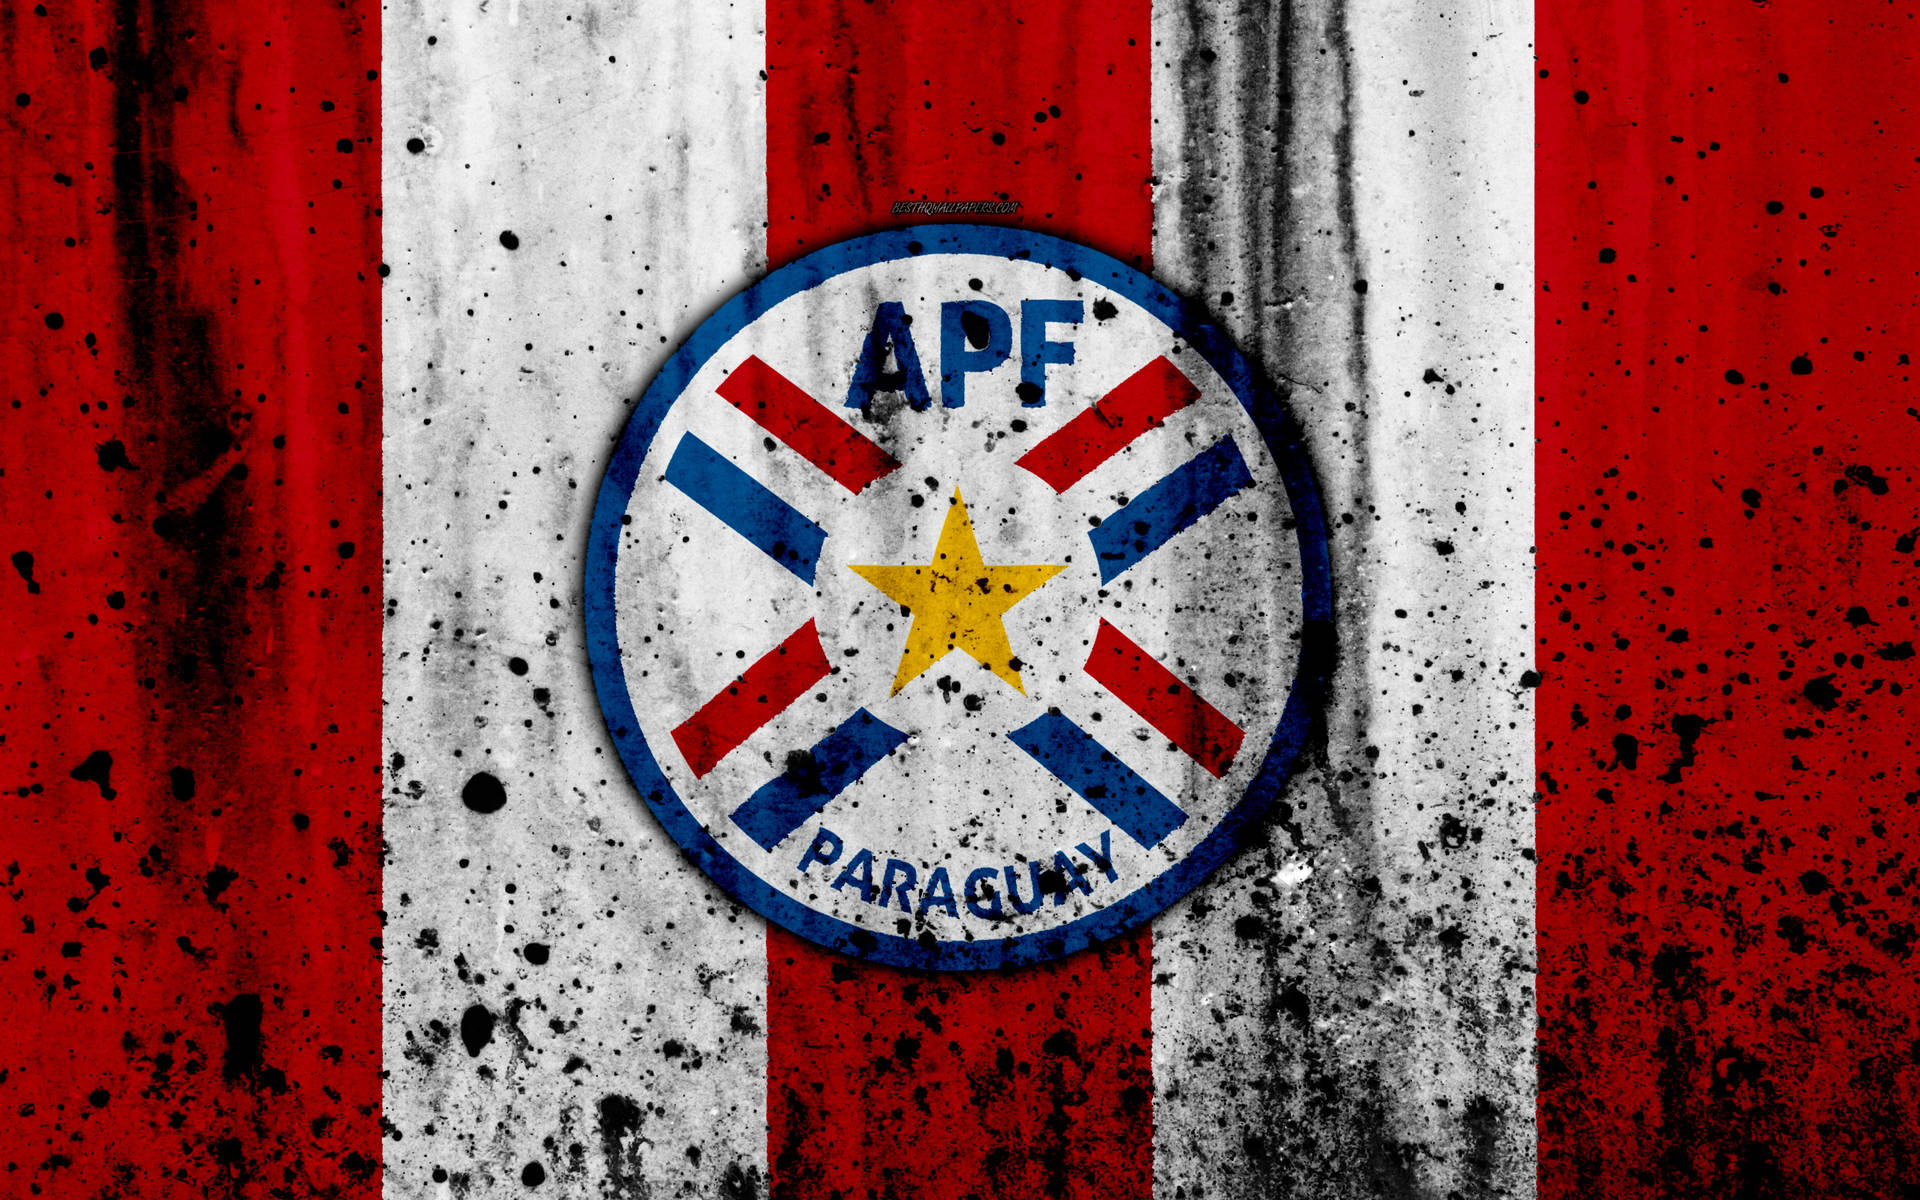 Paraguay Apf Patch